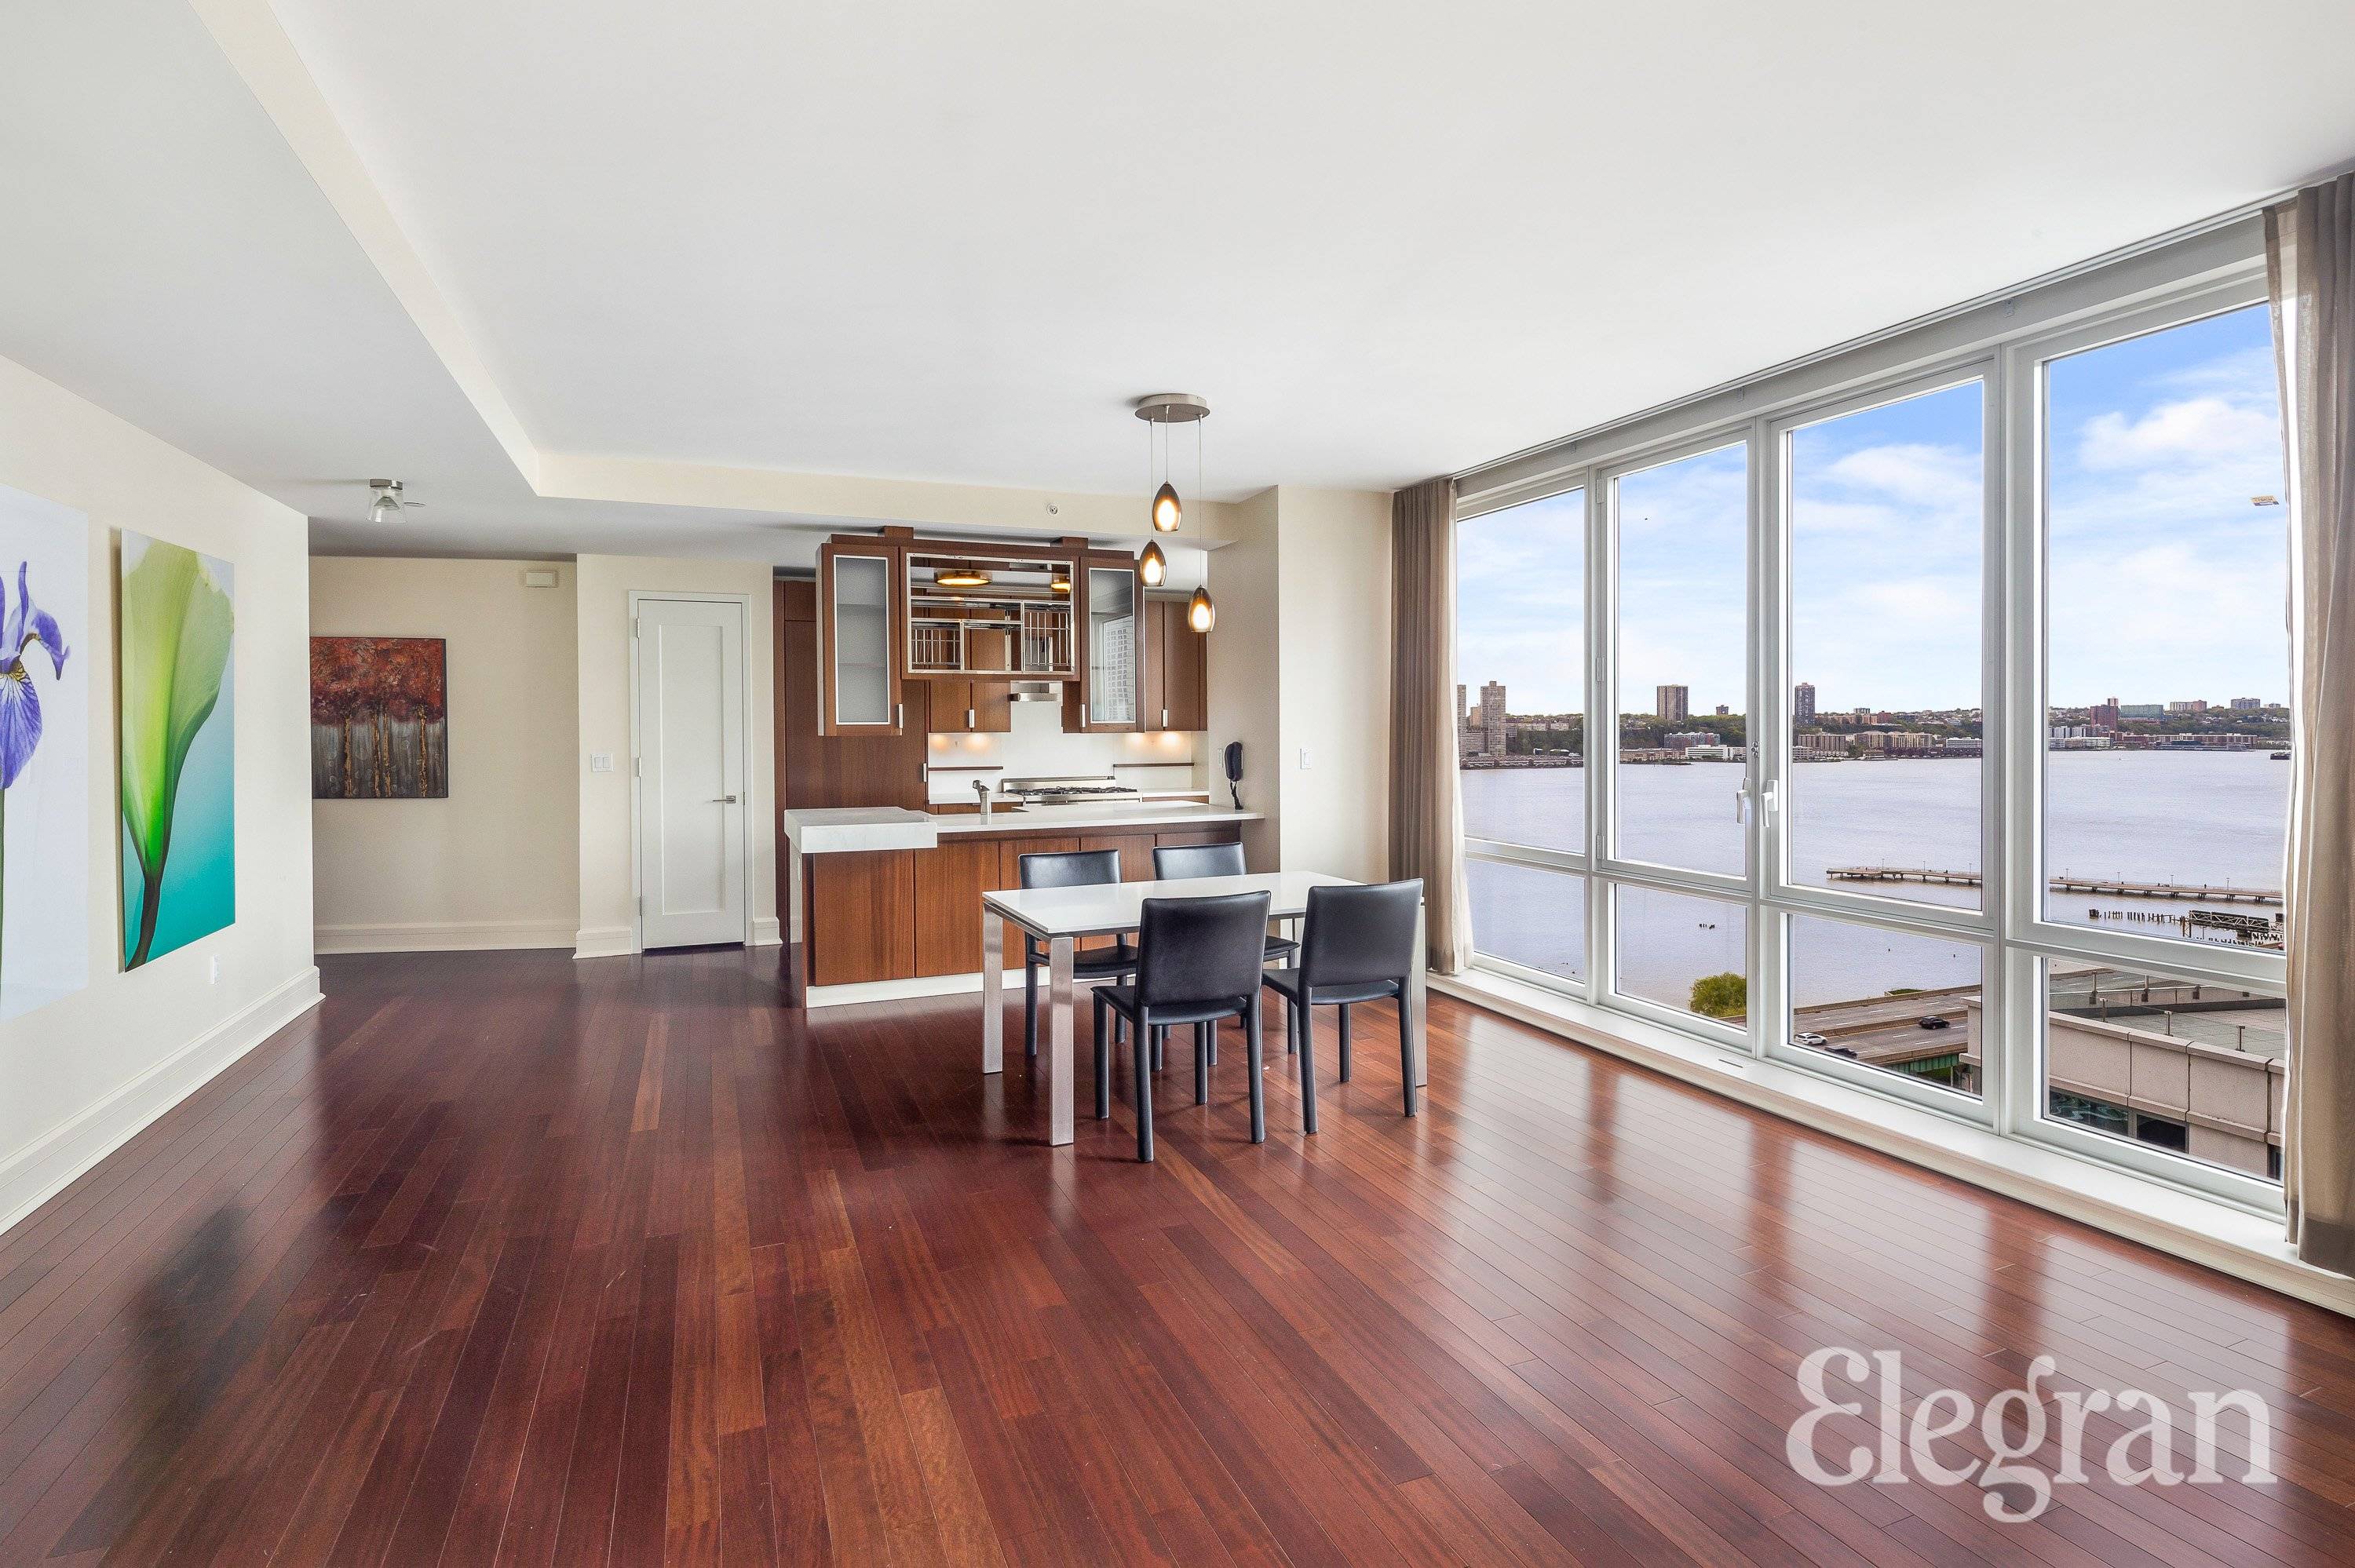 Spacious and pristine corner two bedroom condo with sweeping river views is now available at The Aldyn in Lincoln Square.